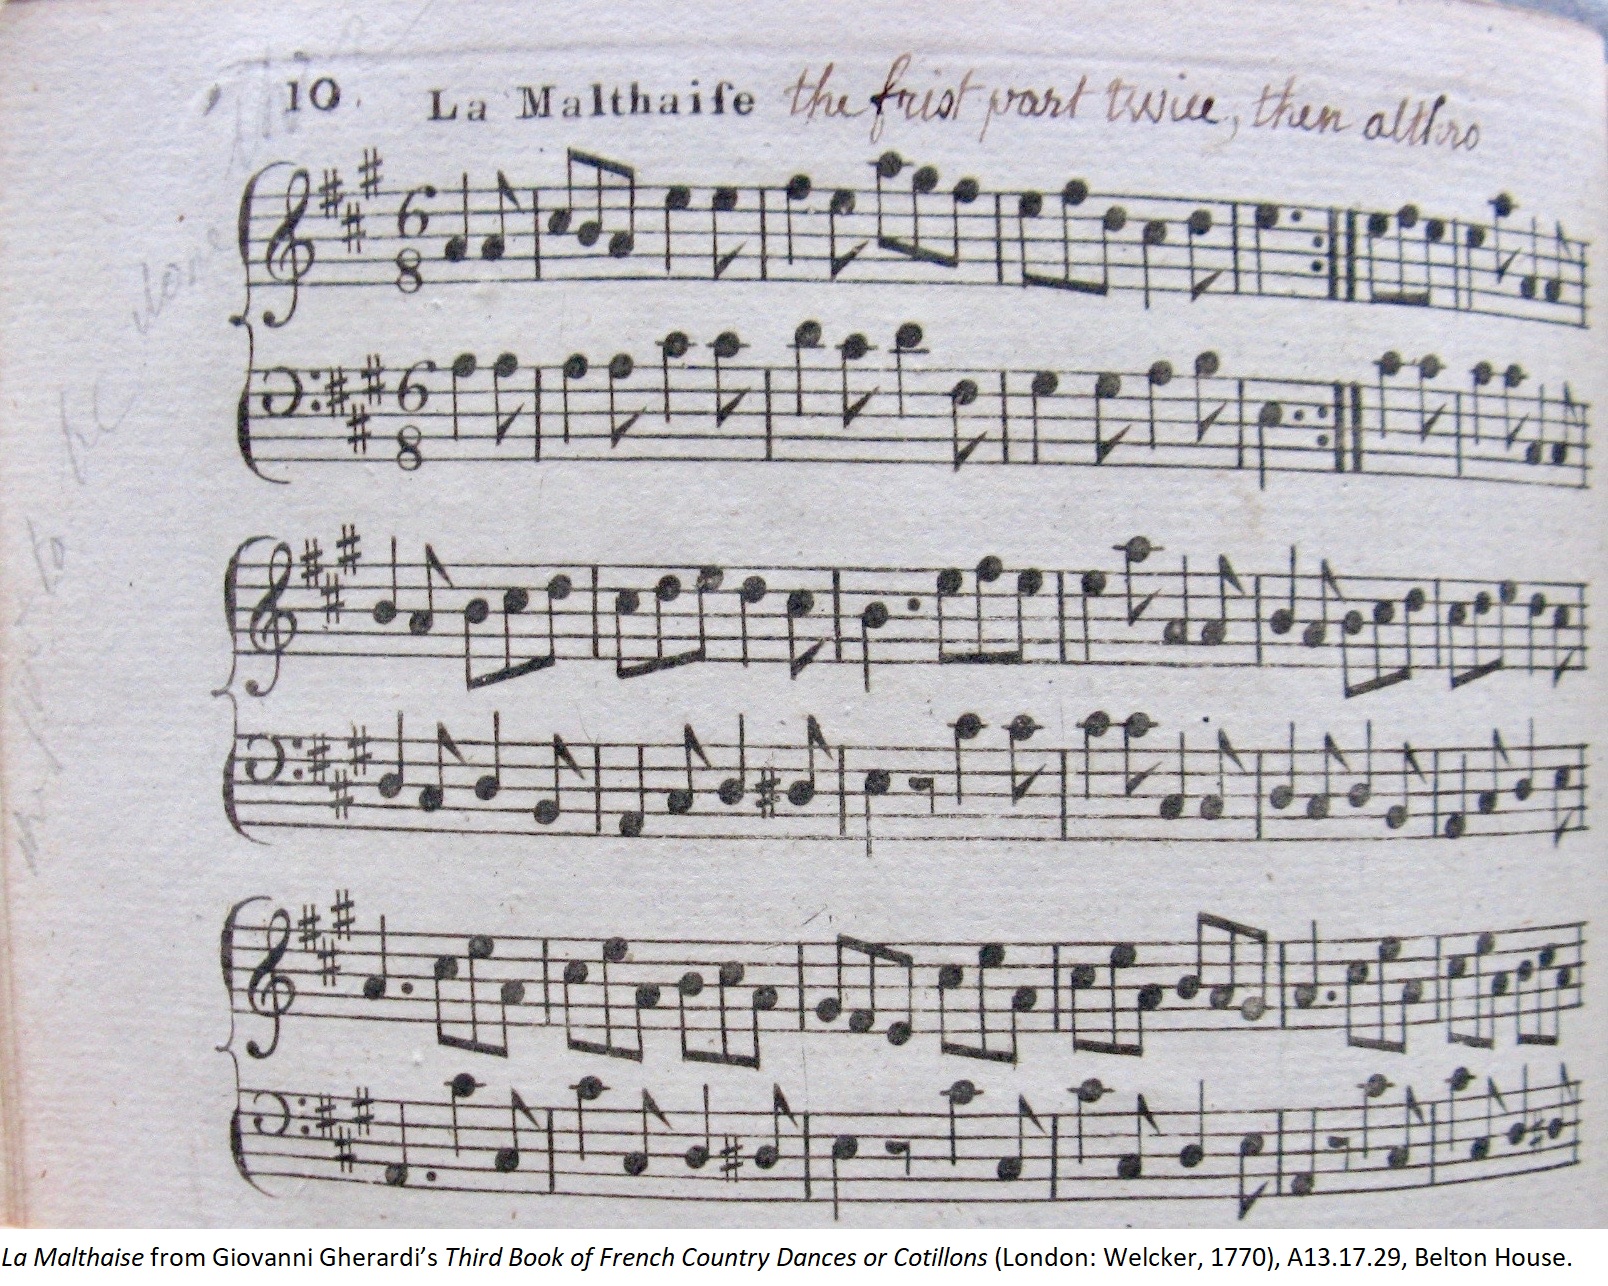 La Malthaise from Giovanni Gherardi’s Third Book of French Country Dances or Cotillons (London: Welcker, 1770), A13.17.29, Belton House.